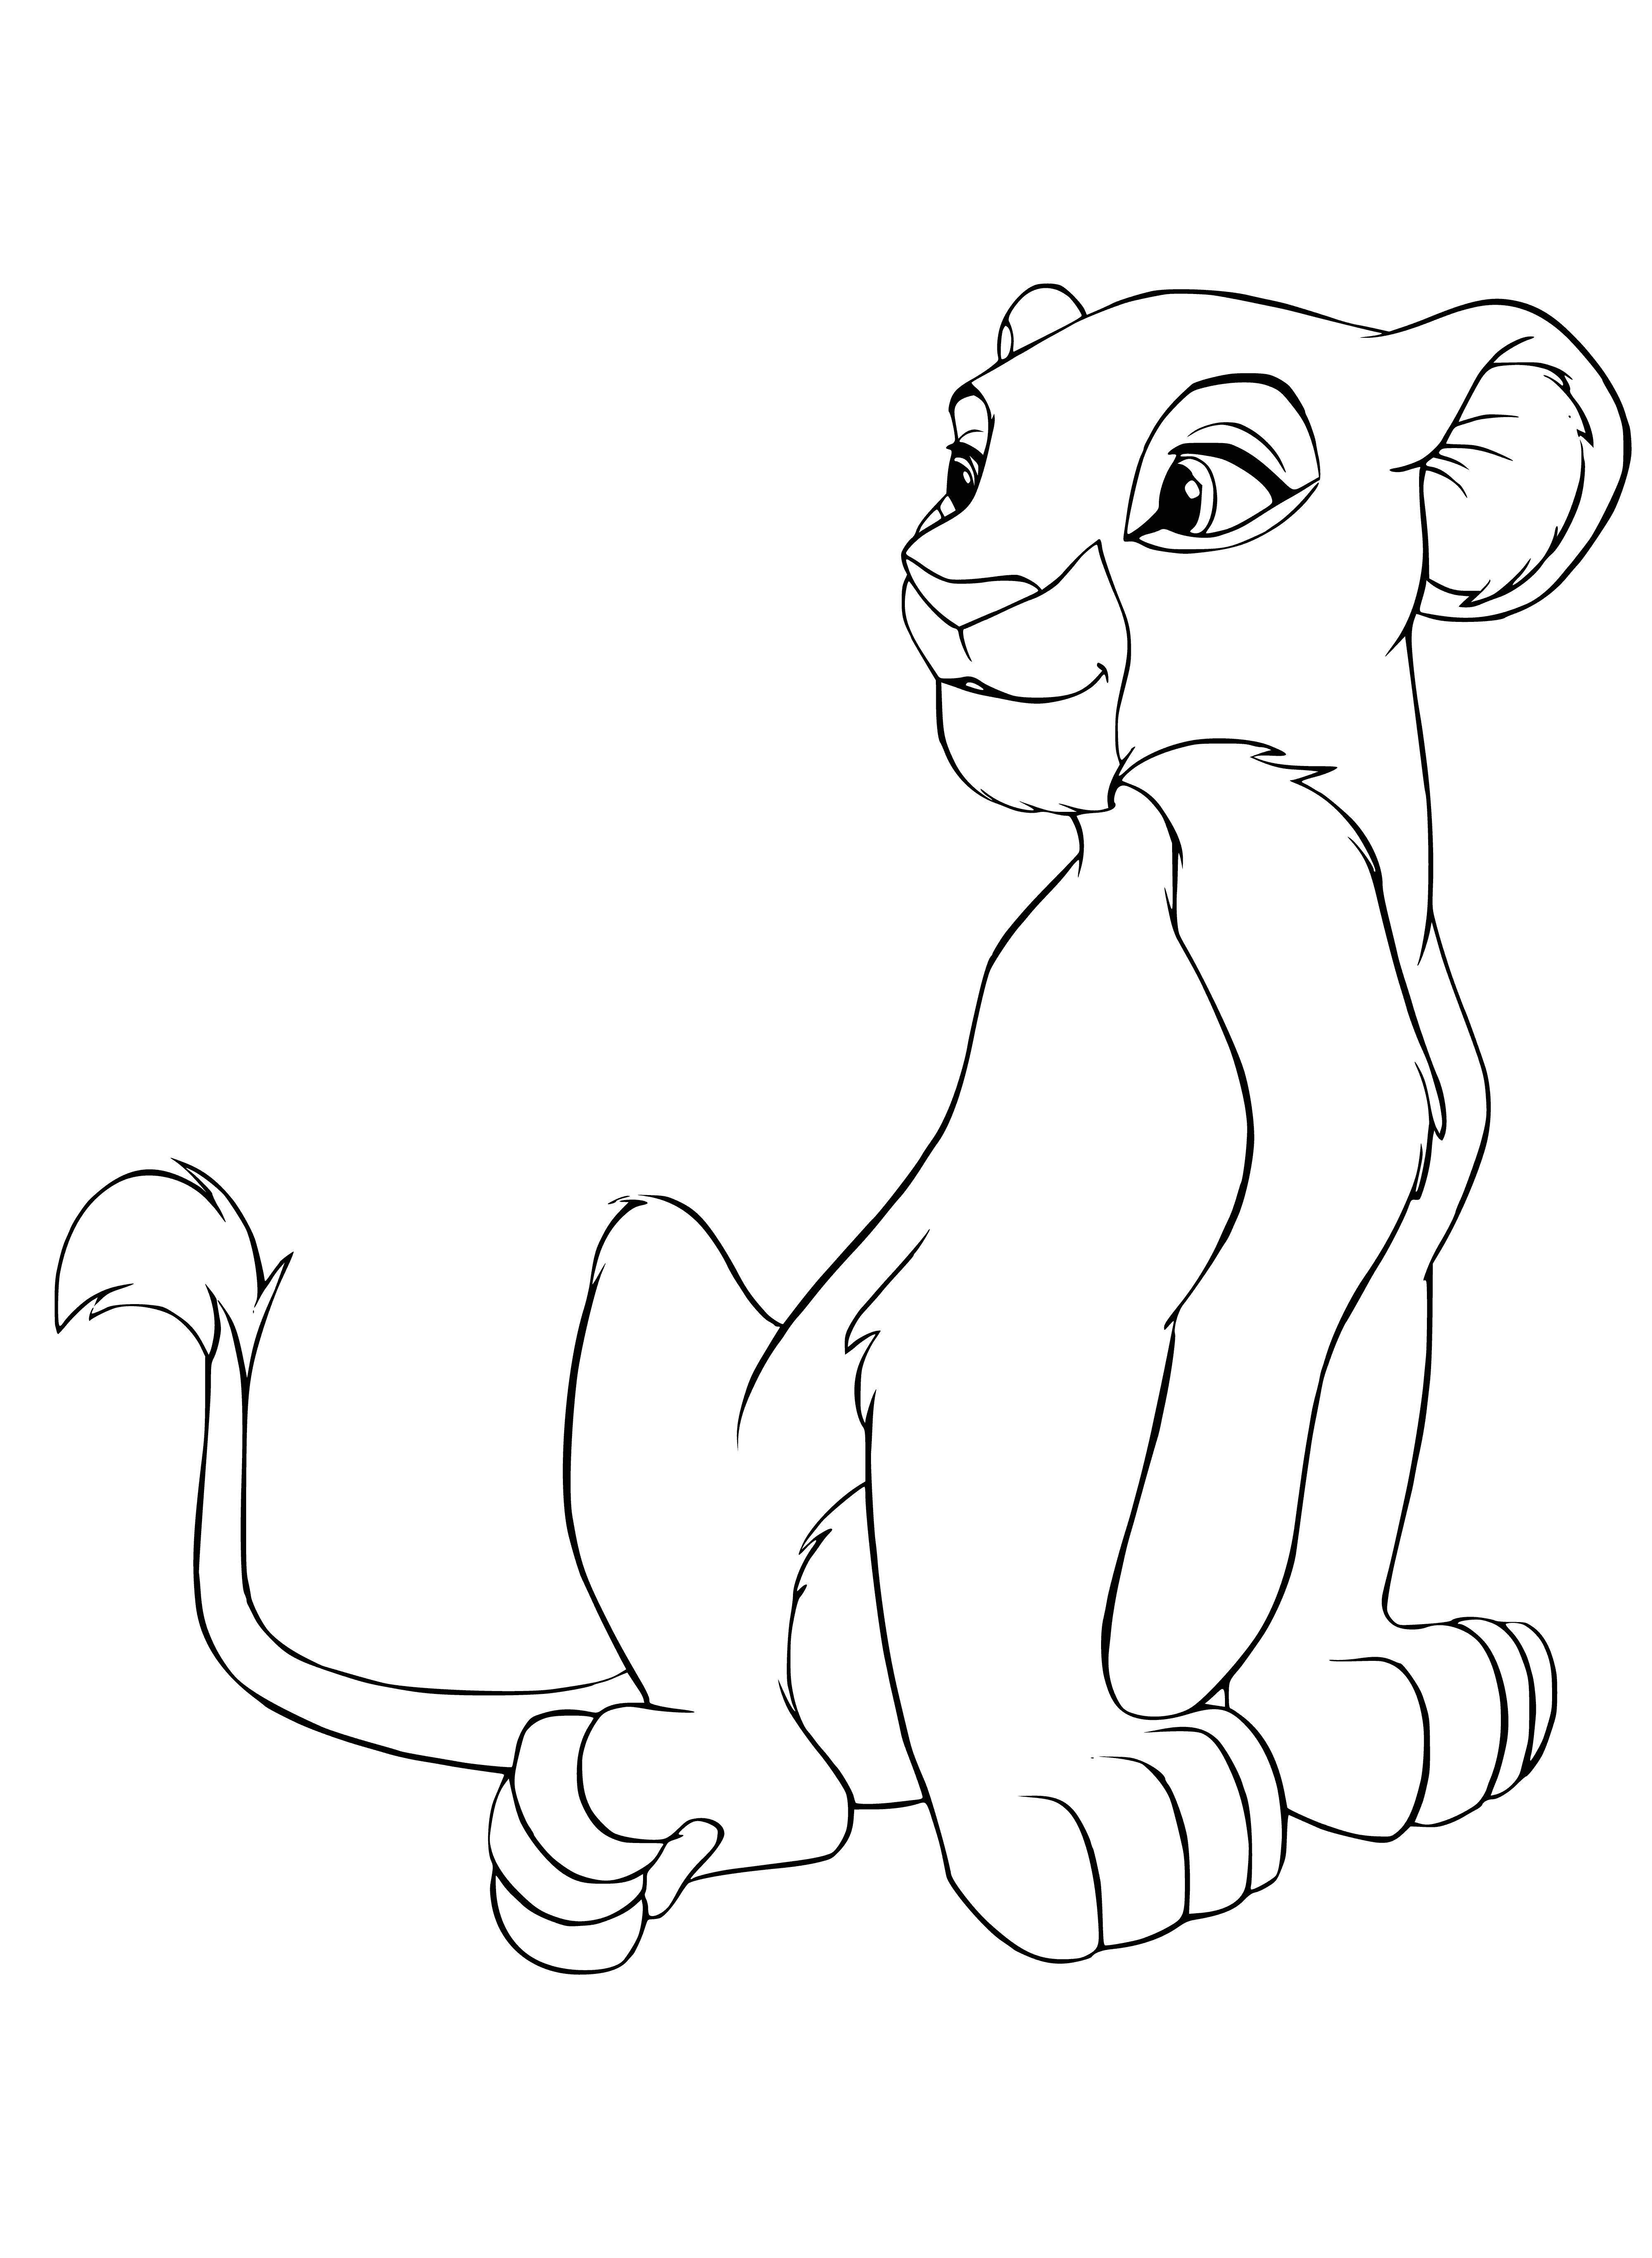 coloring page: Nala is a brave and strong young lioness, best friend and girlfriend to Simba. Playful, curious and friendly, with a beautiful golden coat and big brown eyes.